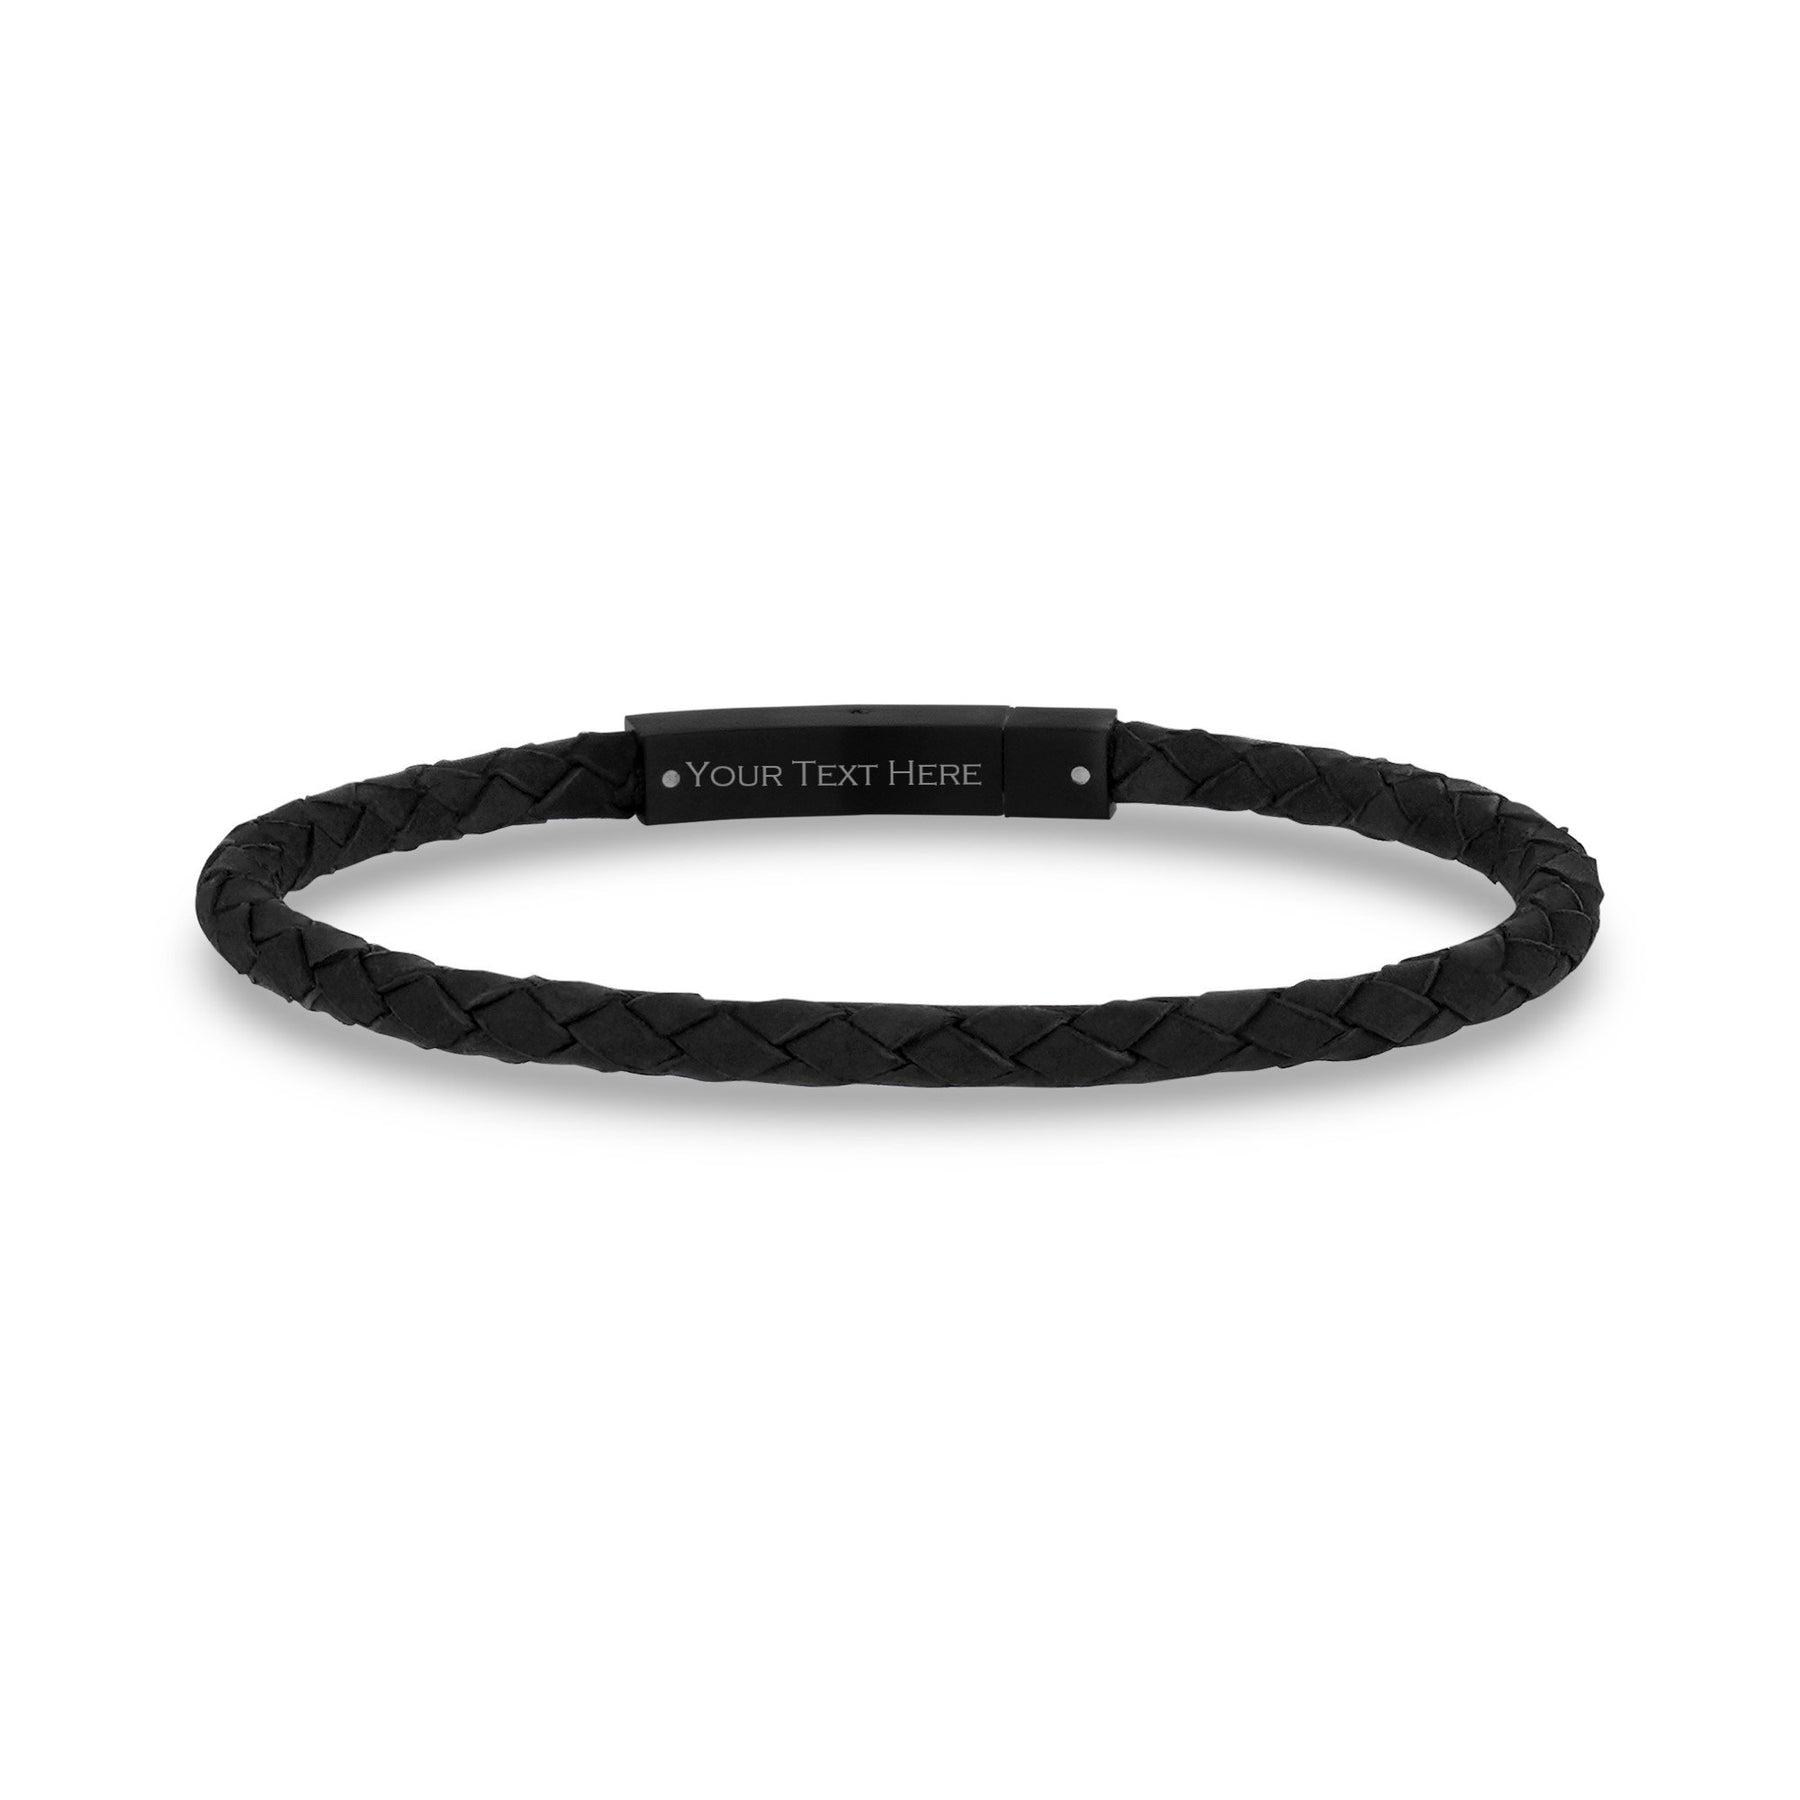 Engravable Thin Black Leather Bracelet with Black Clasp for Mens 8 Inches / Black